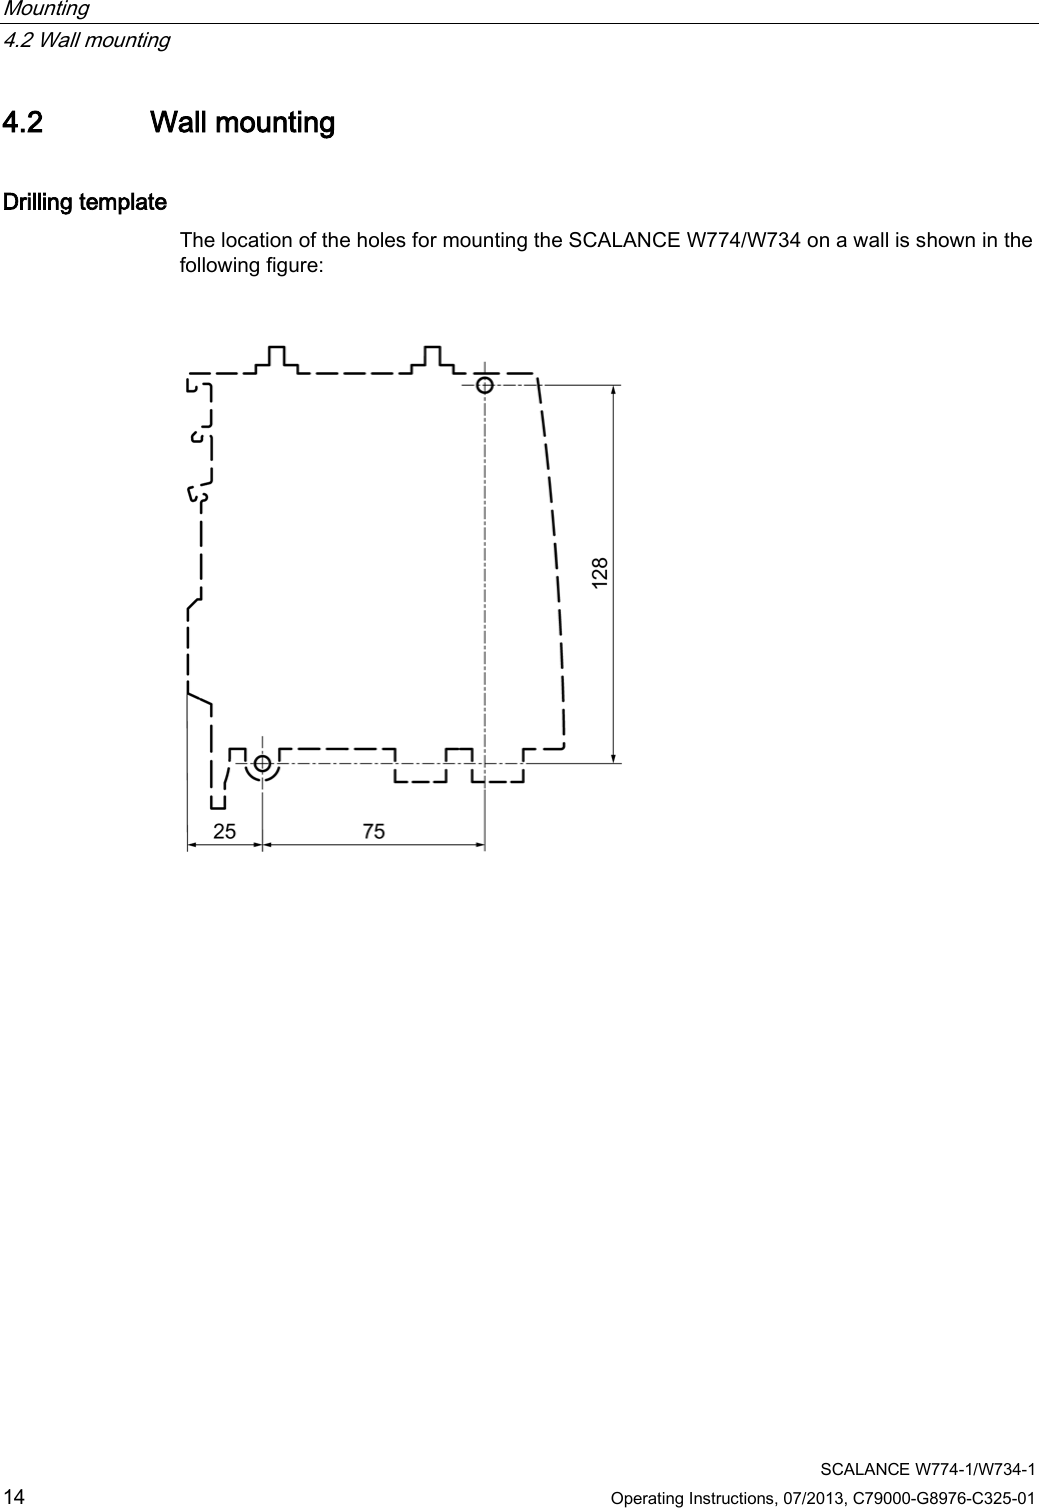 Mounting   4.2 Wall mounting  SCALANCE W774-1/W734-1 14 Operating Instructions, 07/2013, C79000-G8976-C325-01 4.2 Wall mounting Drilling template The location of the holes for mounting the SCALANCE W774/W734 on a wall is shown in the following figure:   